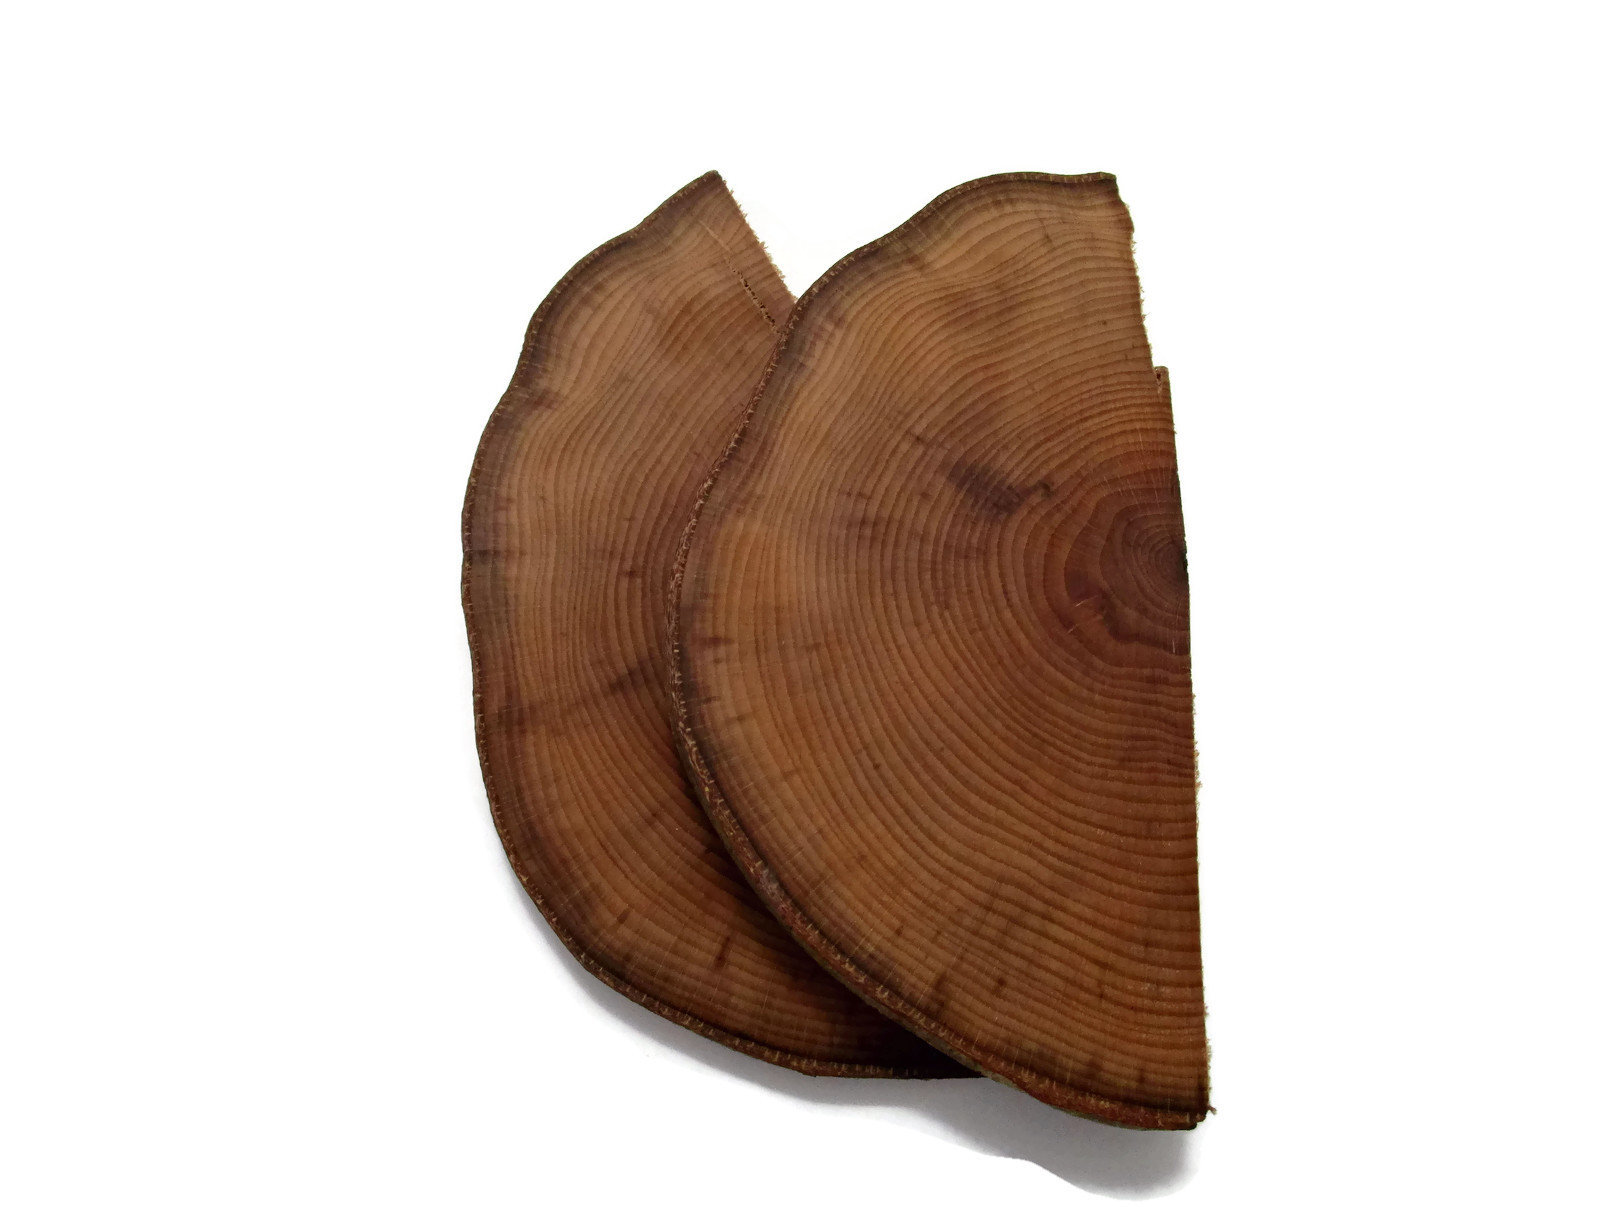 Details about   Beautiful Wood Natural Round Wood Pine Tree Slice Disc Wedding Centerpiece Decor 